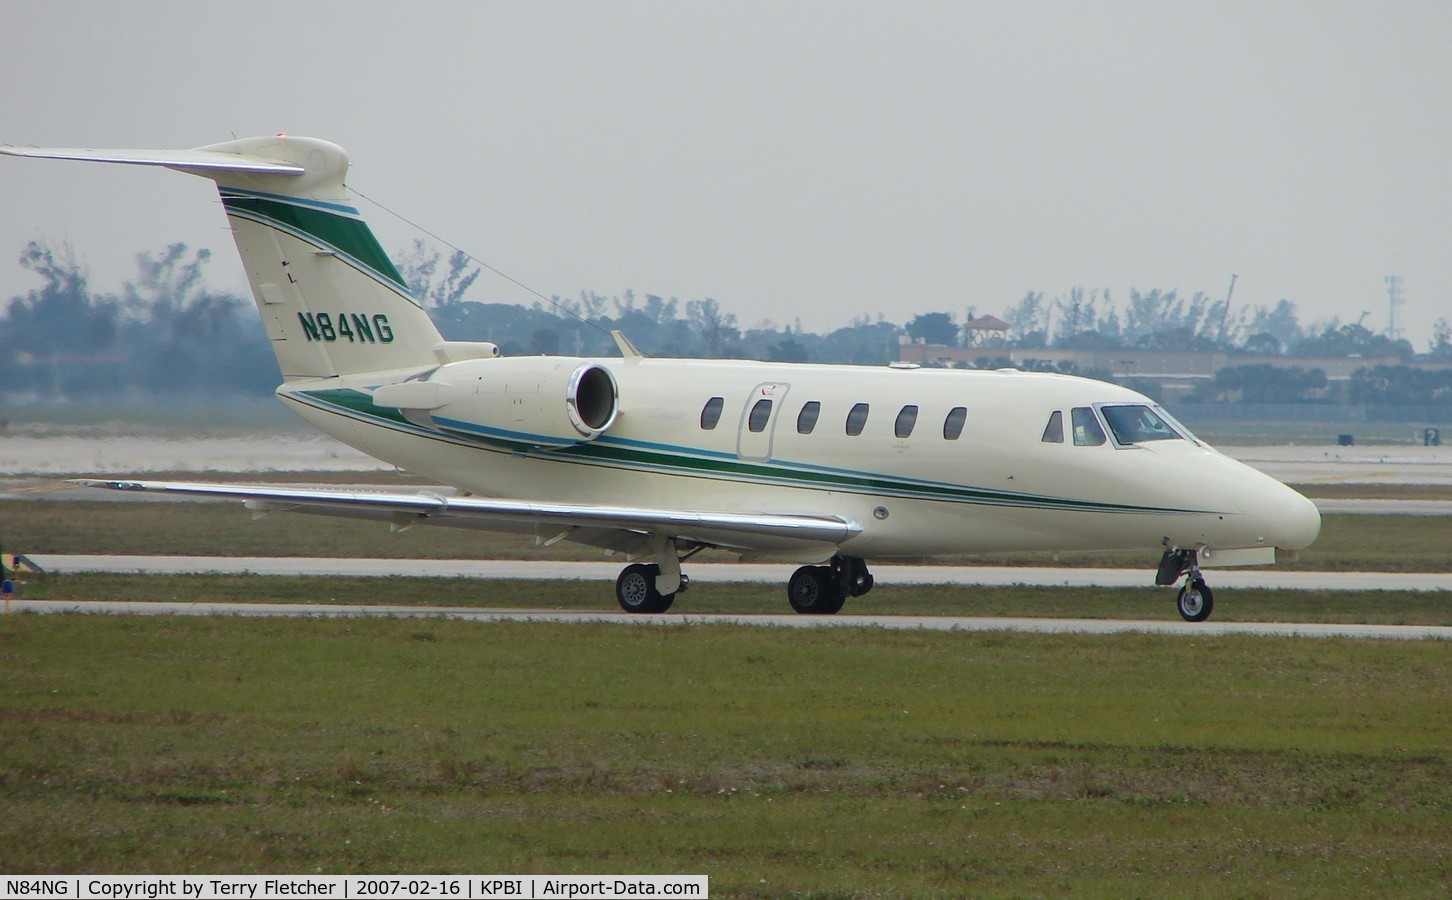 N84NG, 1997 Cessna 650 C/N 650-7078, part of the Friday afternoon arrivals 'rush' at PBI